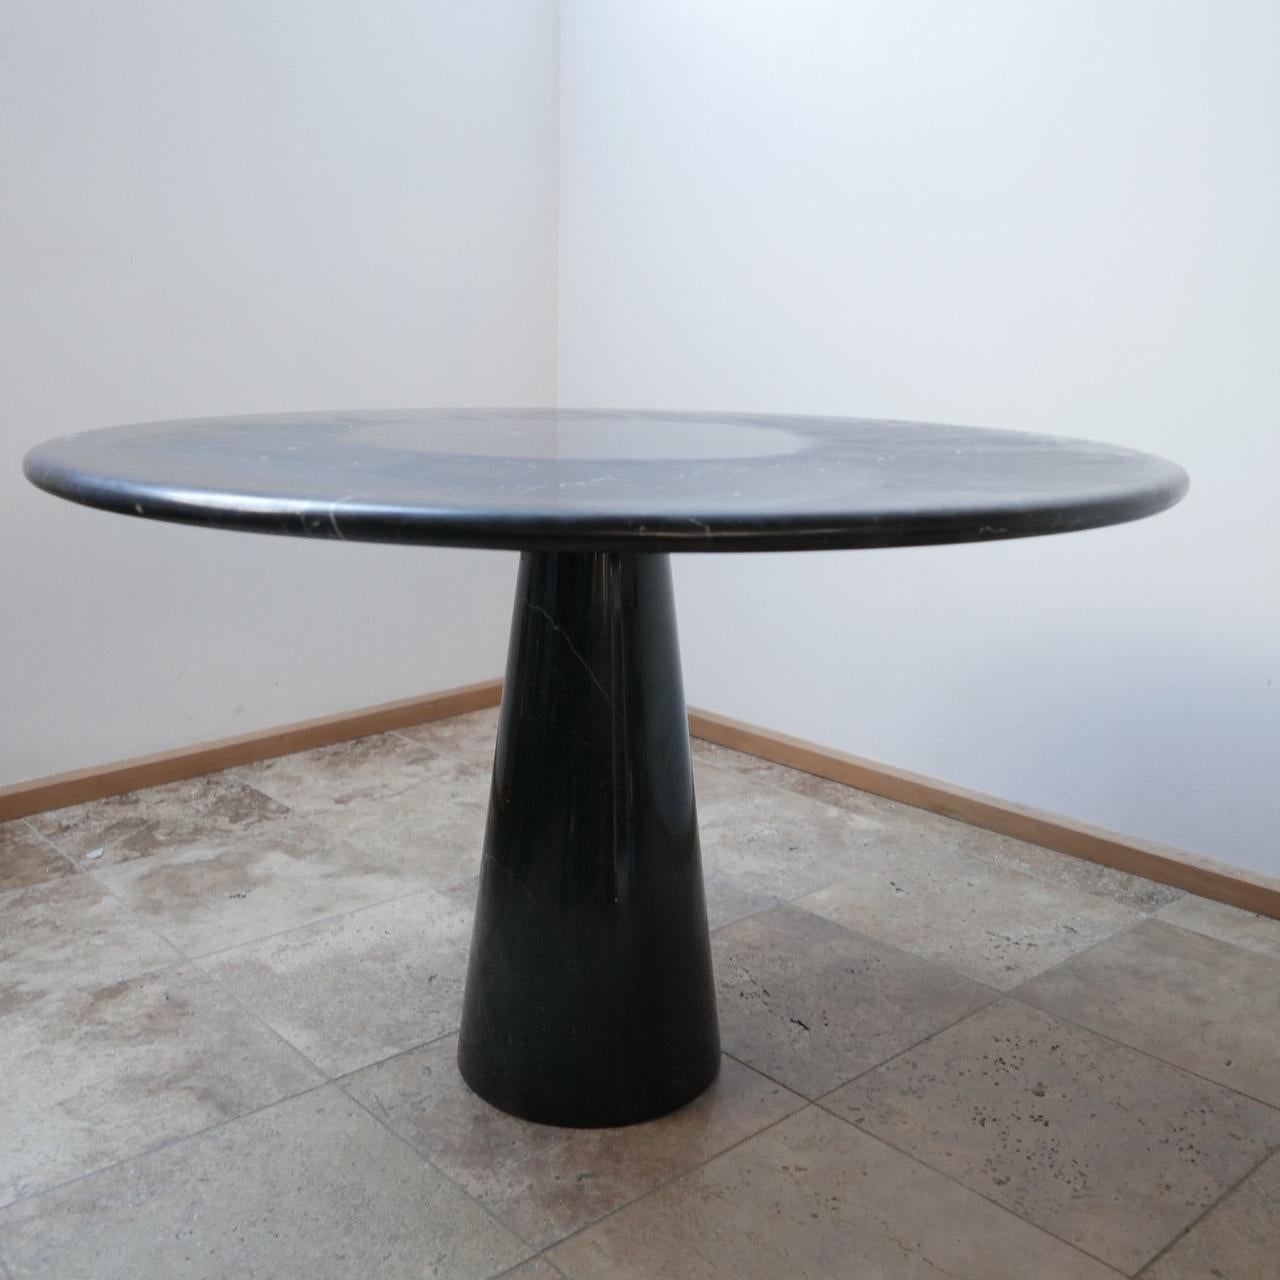 A circular marble table by Angelo Mangiarotti in Nero Marquina,

Italy, circa 1970s.

A well sized table perfect for a smaller room or in the corner of a larger room.

The marble specimen used is good quality and interesting with veins running